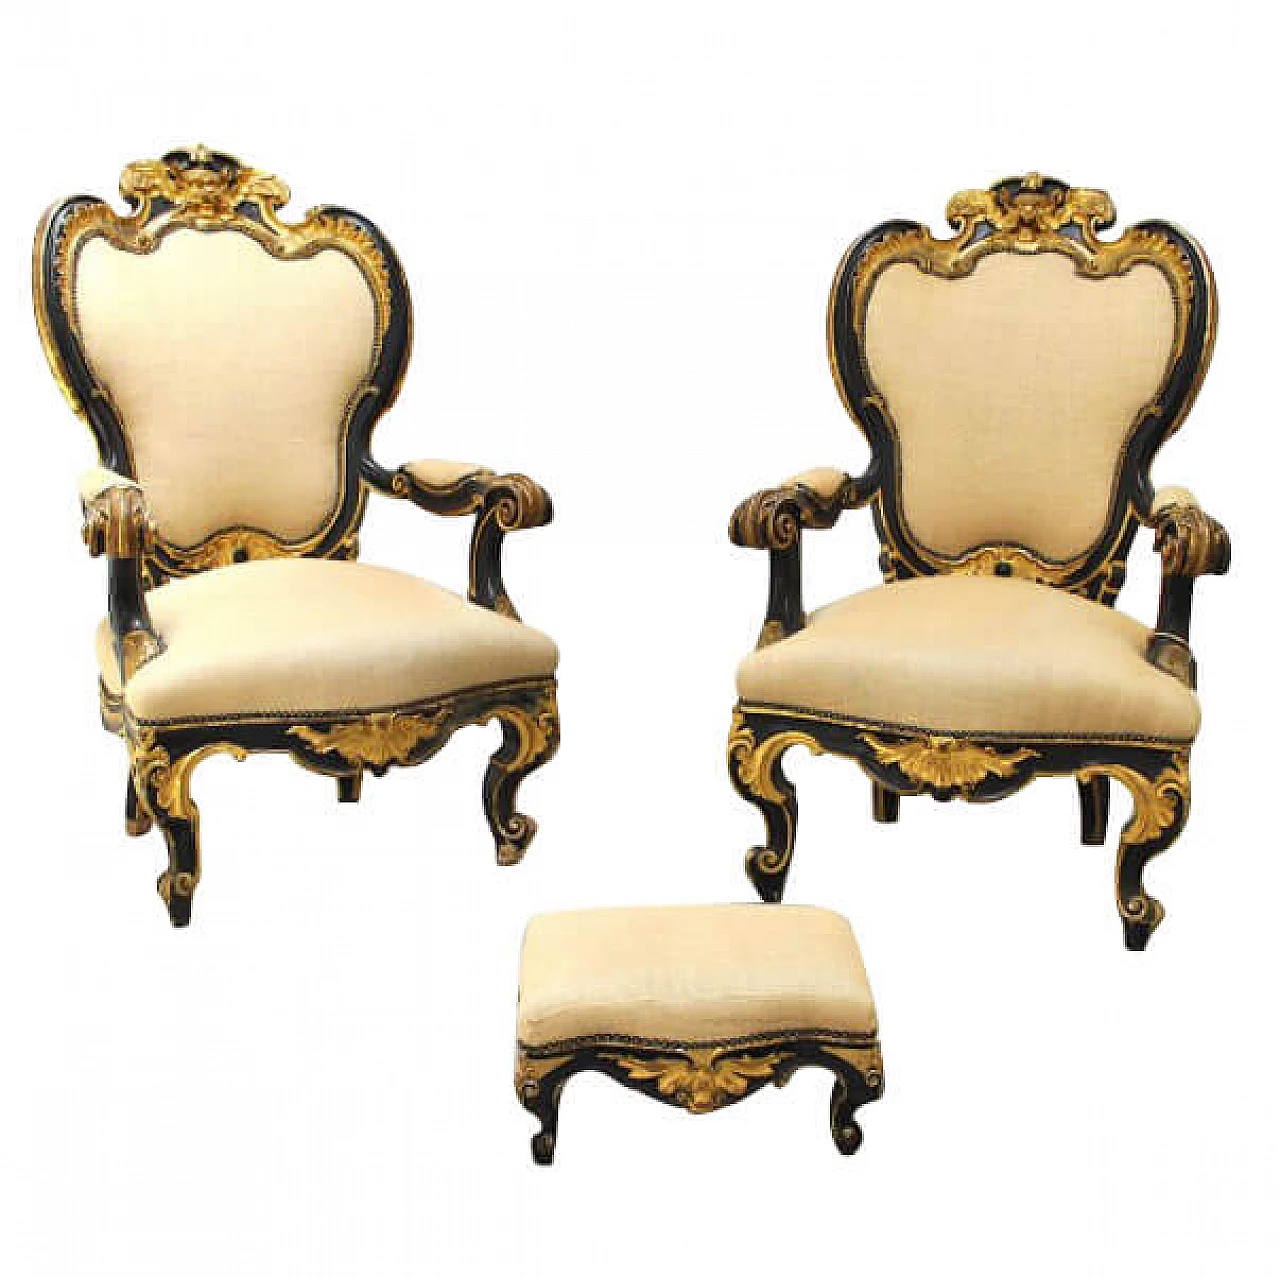 Pair of armchairs and footstool in wood and fabric, 19th century 1222703